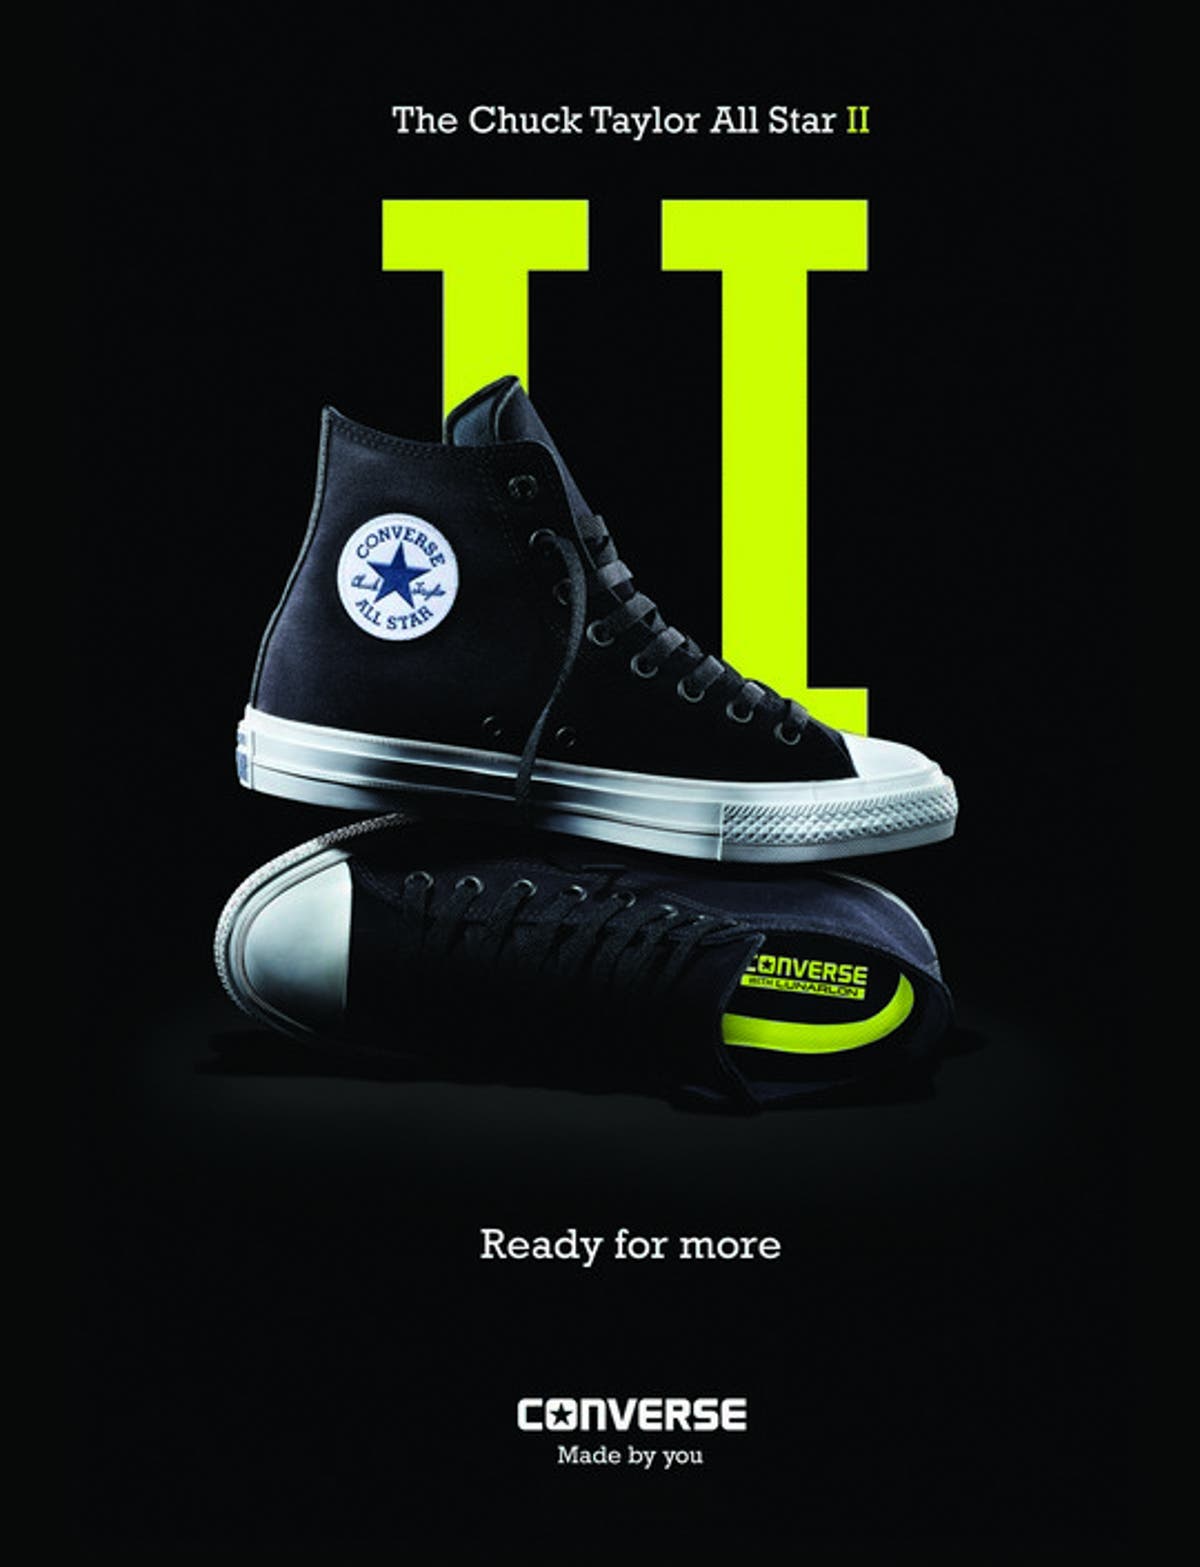 NEW Chuck Taylor All Star 2 Now in Manila: Converse Updates Shoe After Nearly Years When In Manila